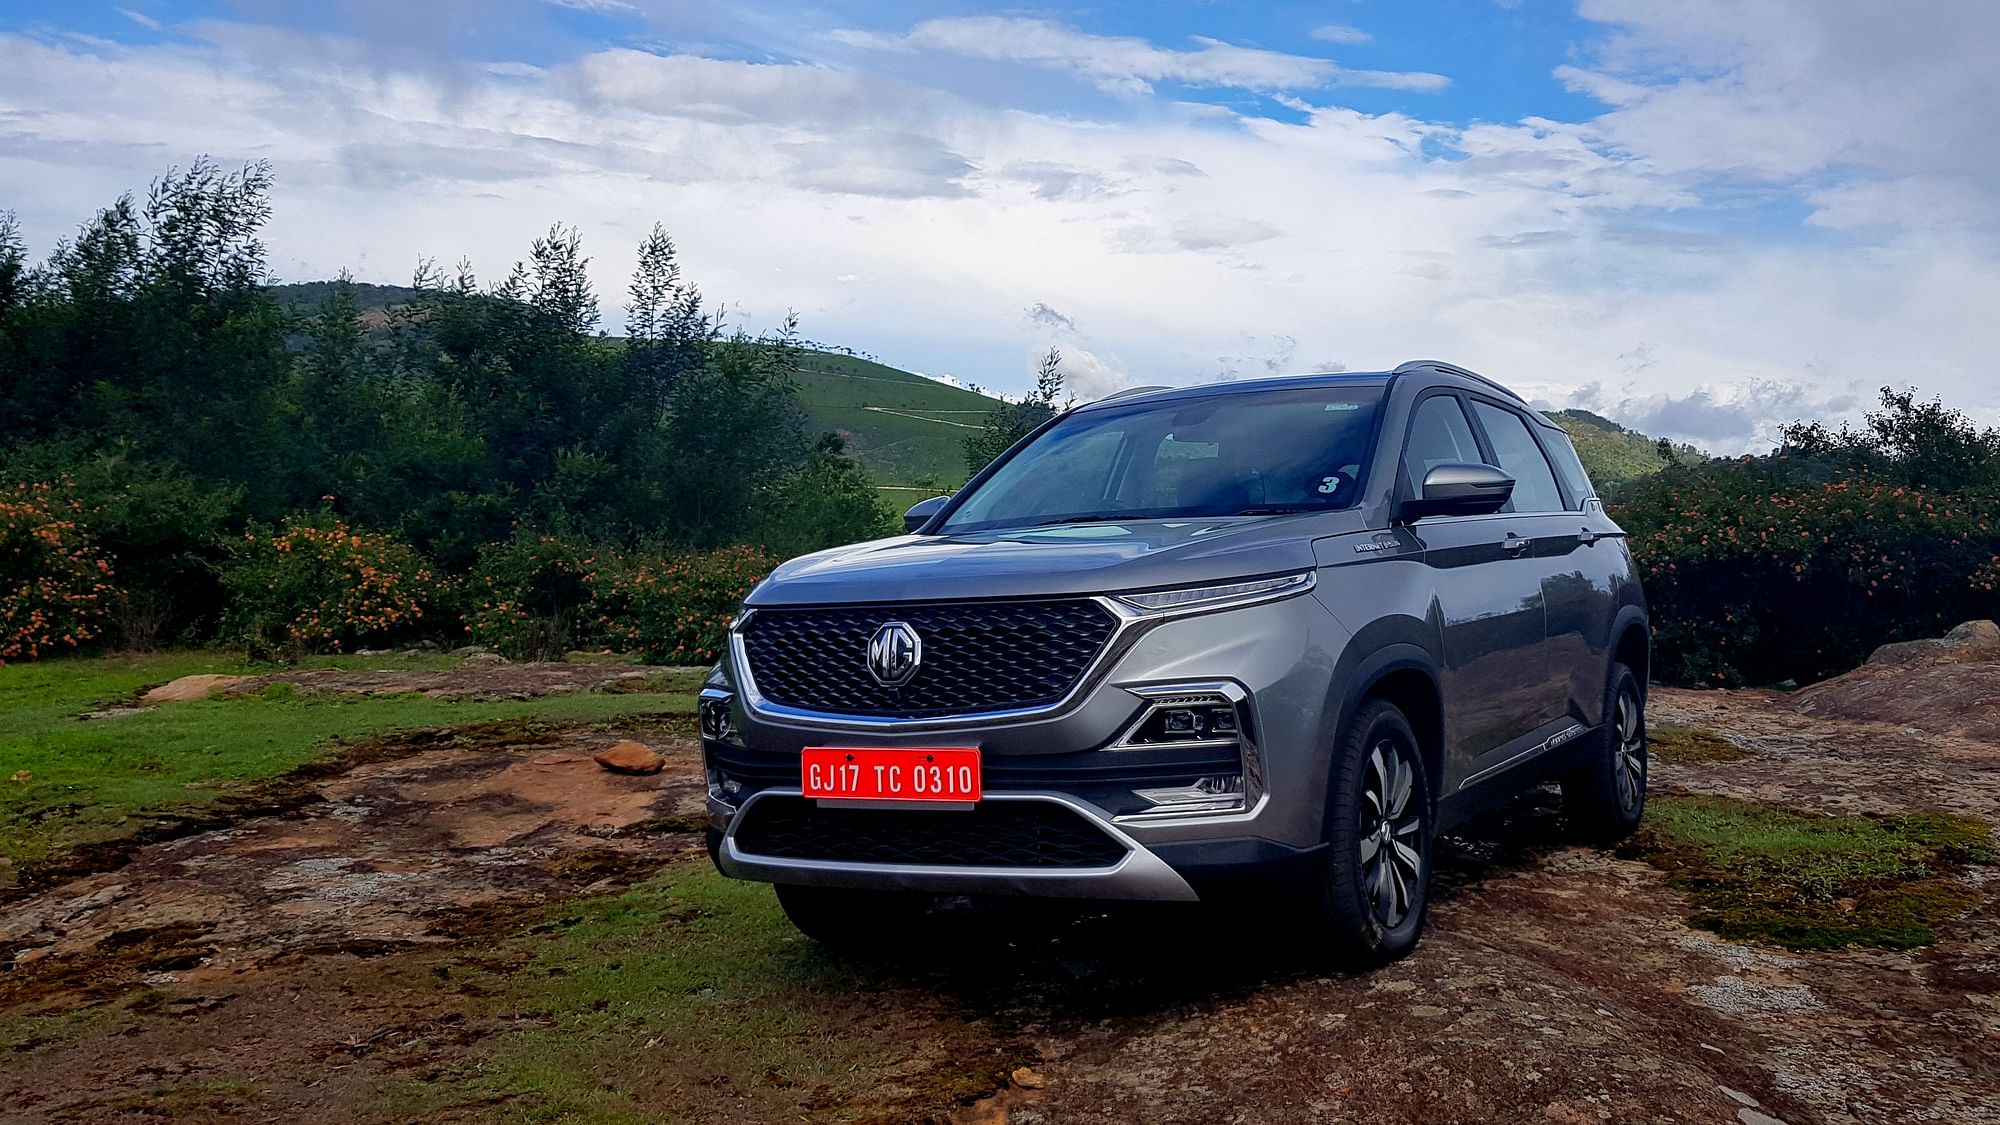 The MG Hector comes loaded with a long feature list and internet connectivity.